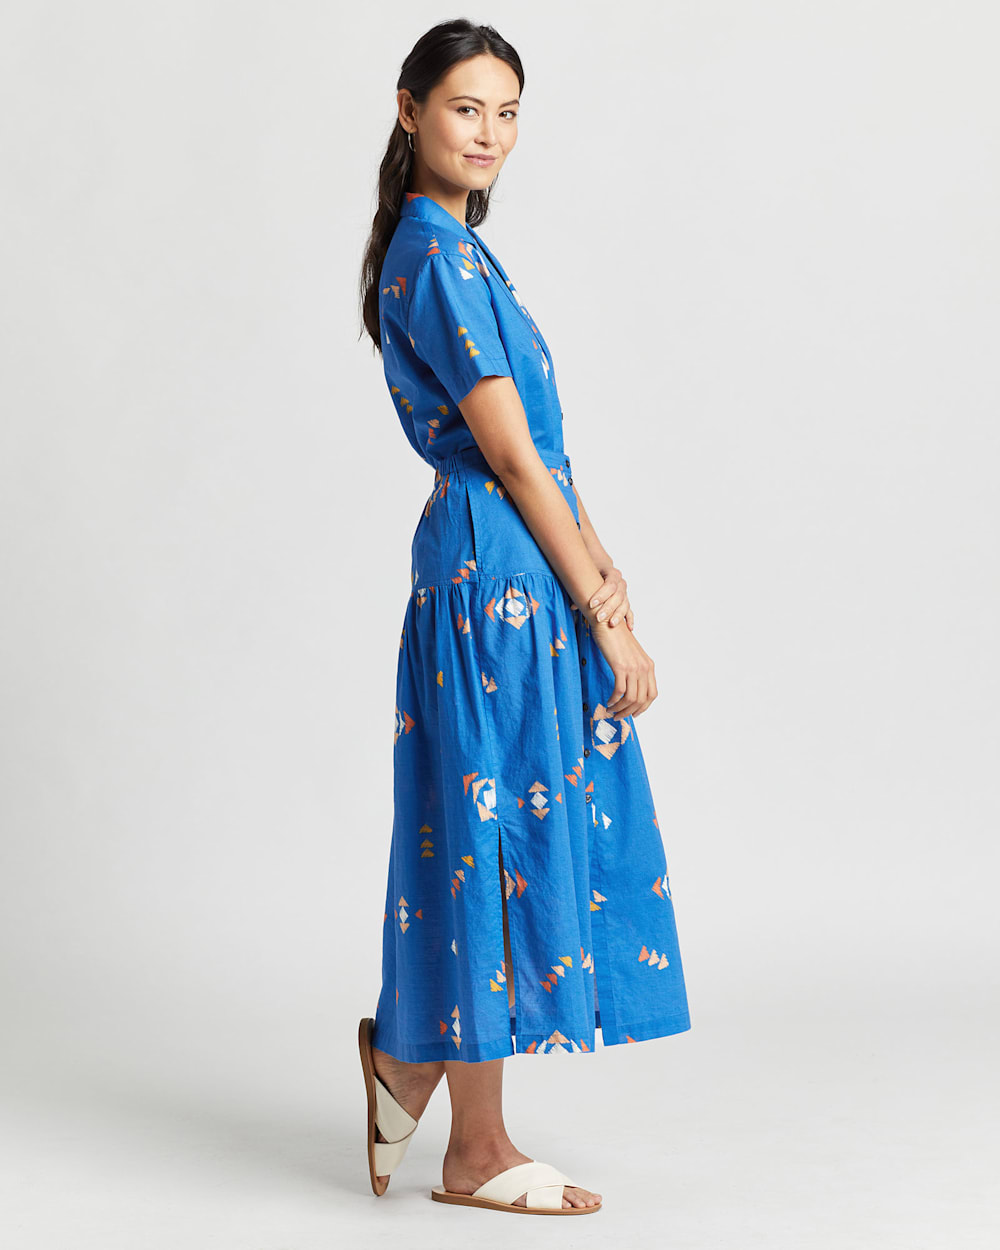 ALTERNATE VIEW OF BUTTON-FRONT PRINTED MIDI SKIRT IN VALLARTA BLUE MULTI image number 2